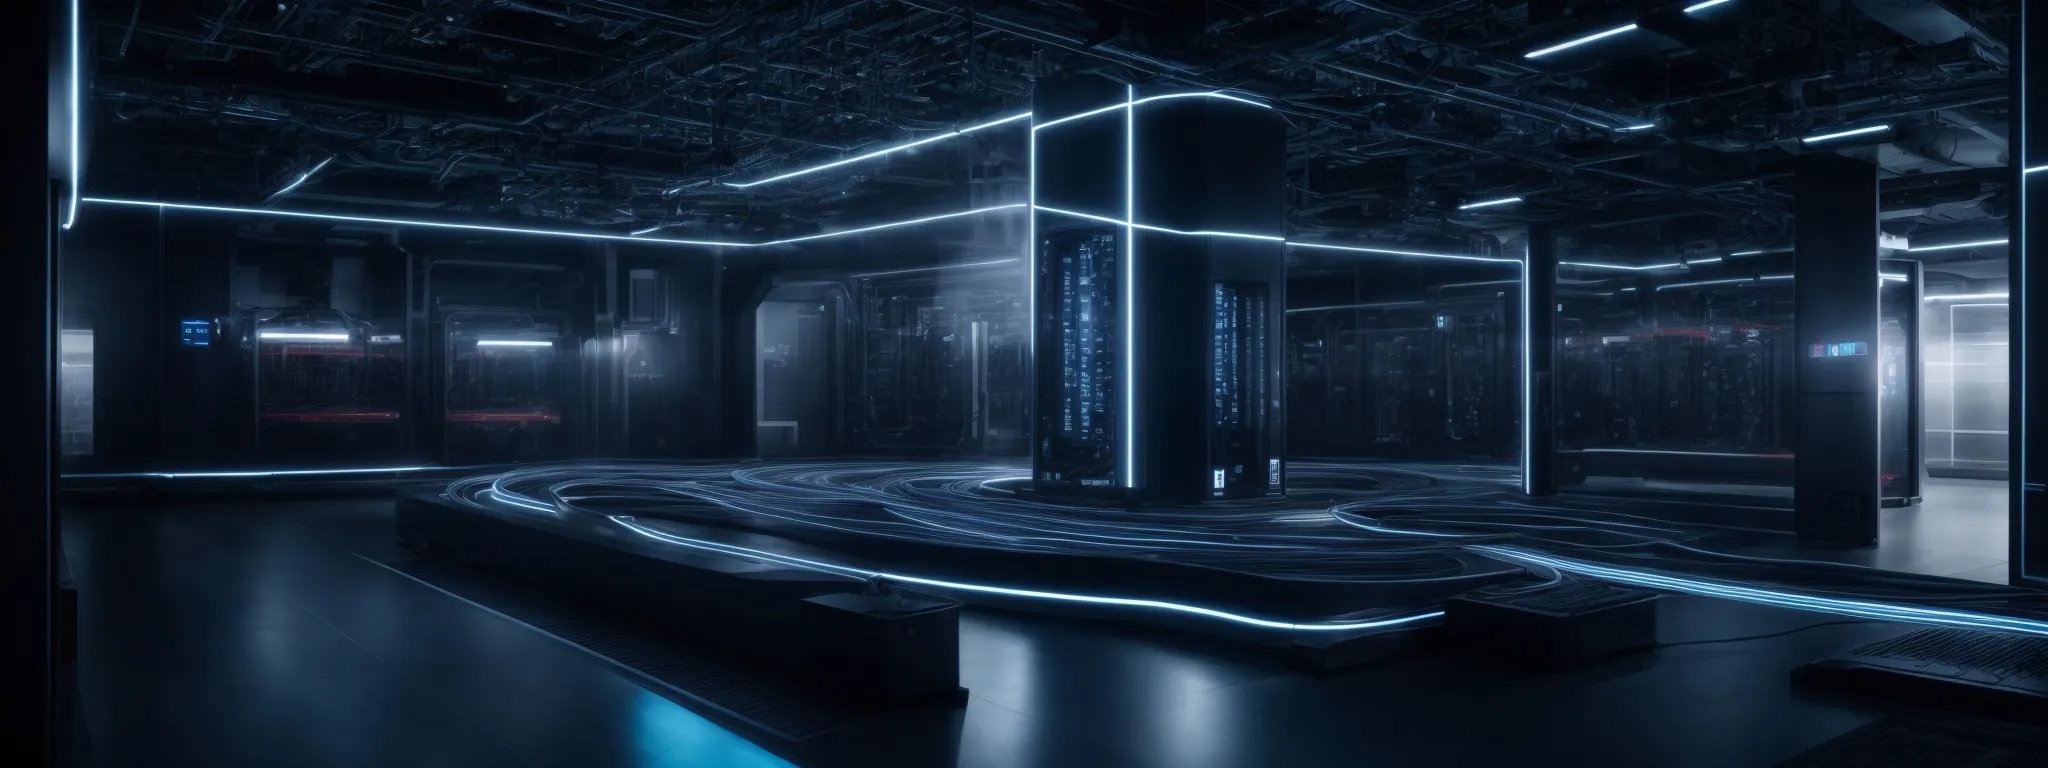 a sleek futuristic data center with glowing lights and fiber-optic cables representing high-speed internet connectivity.